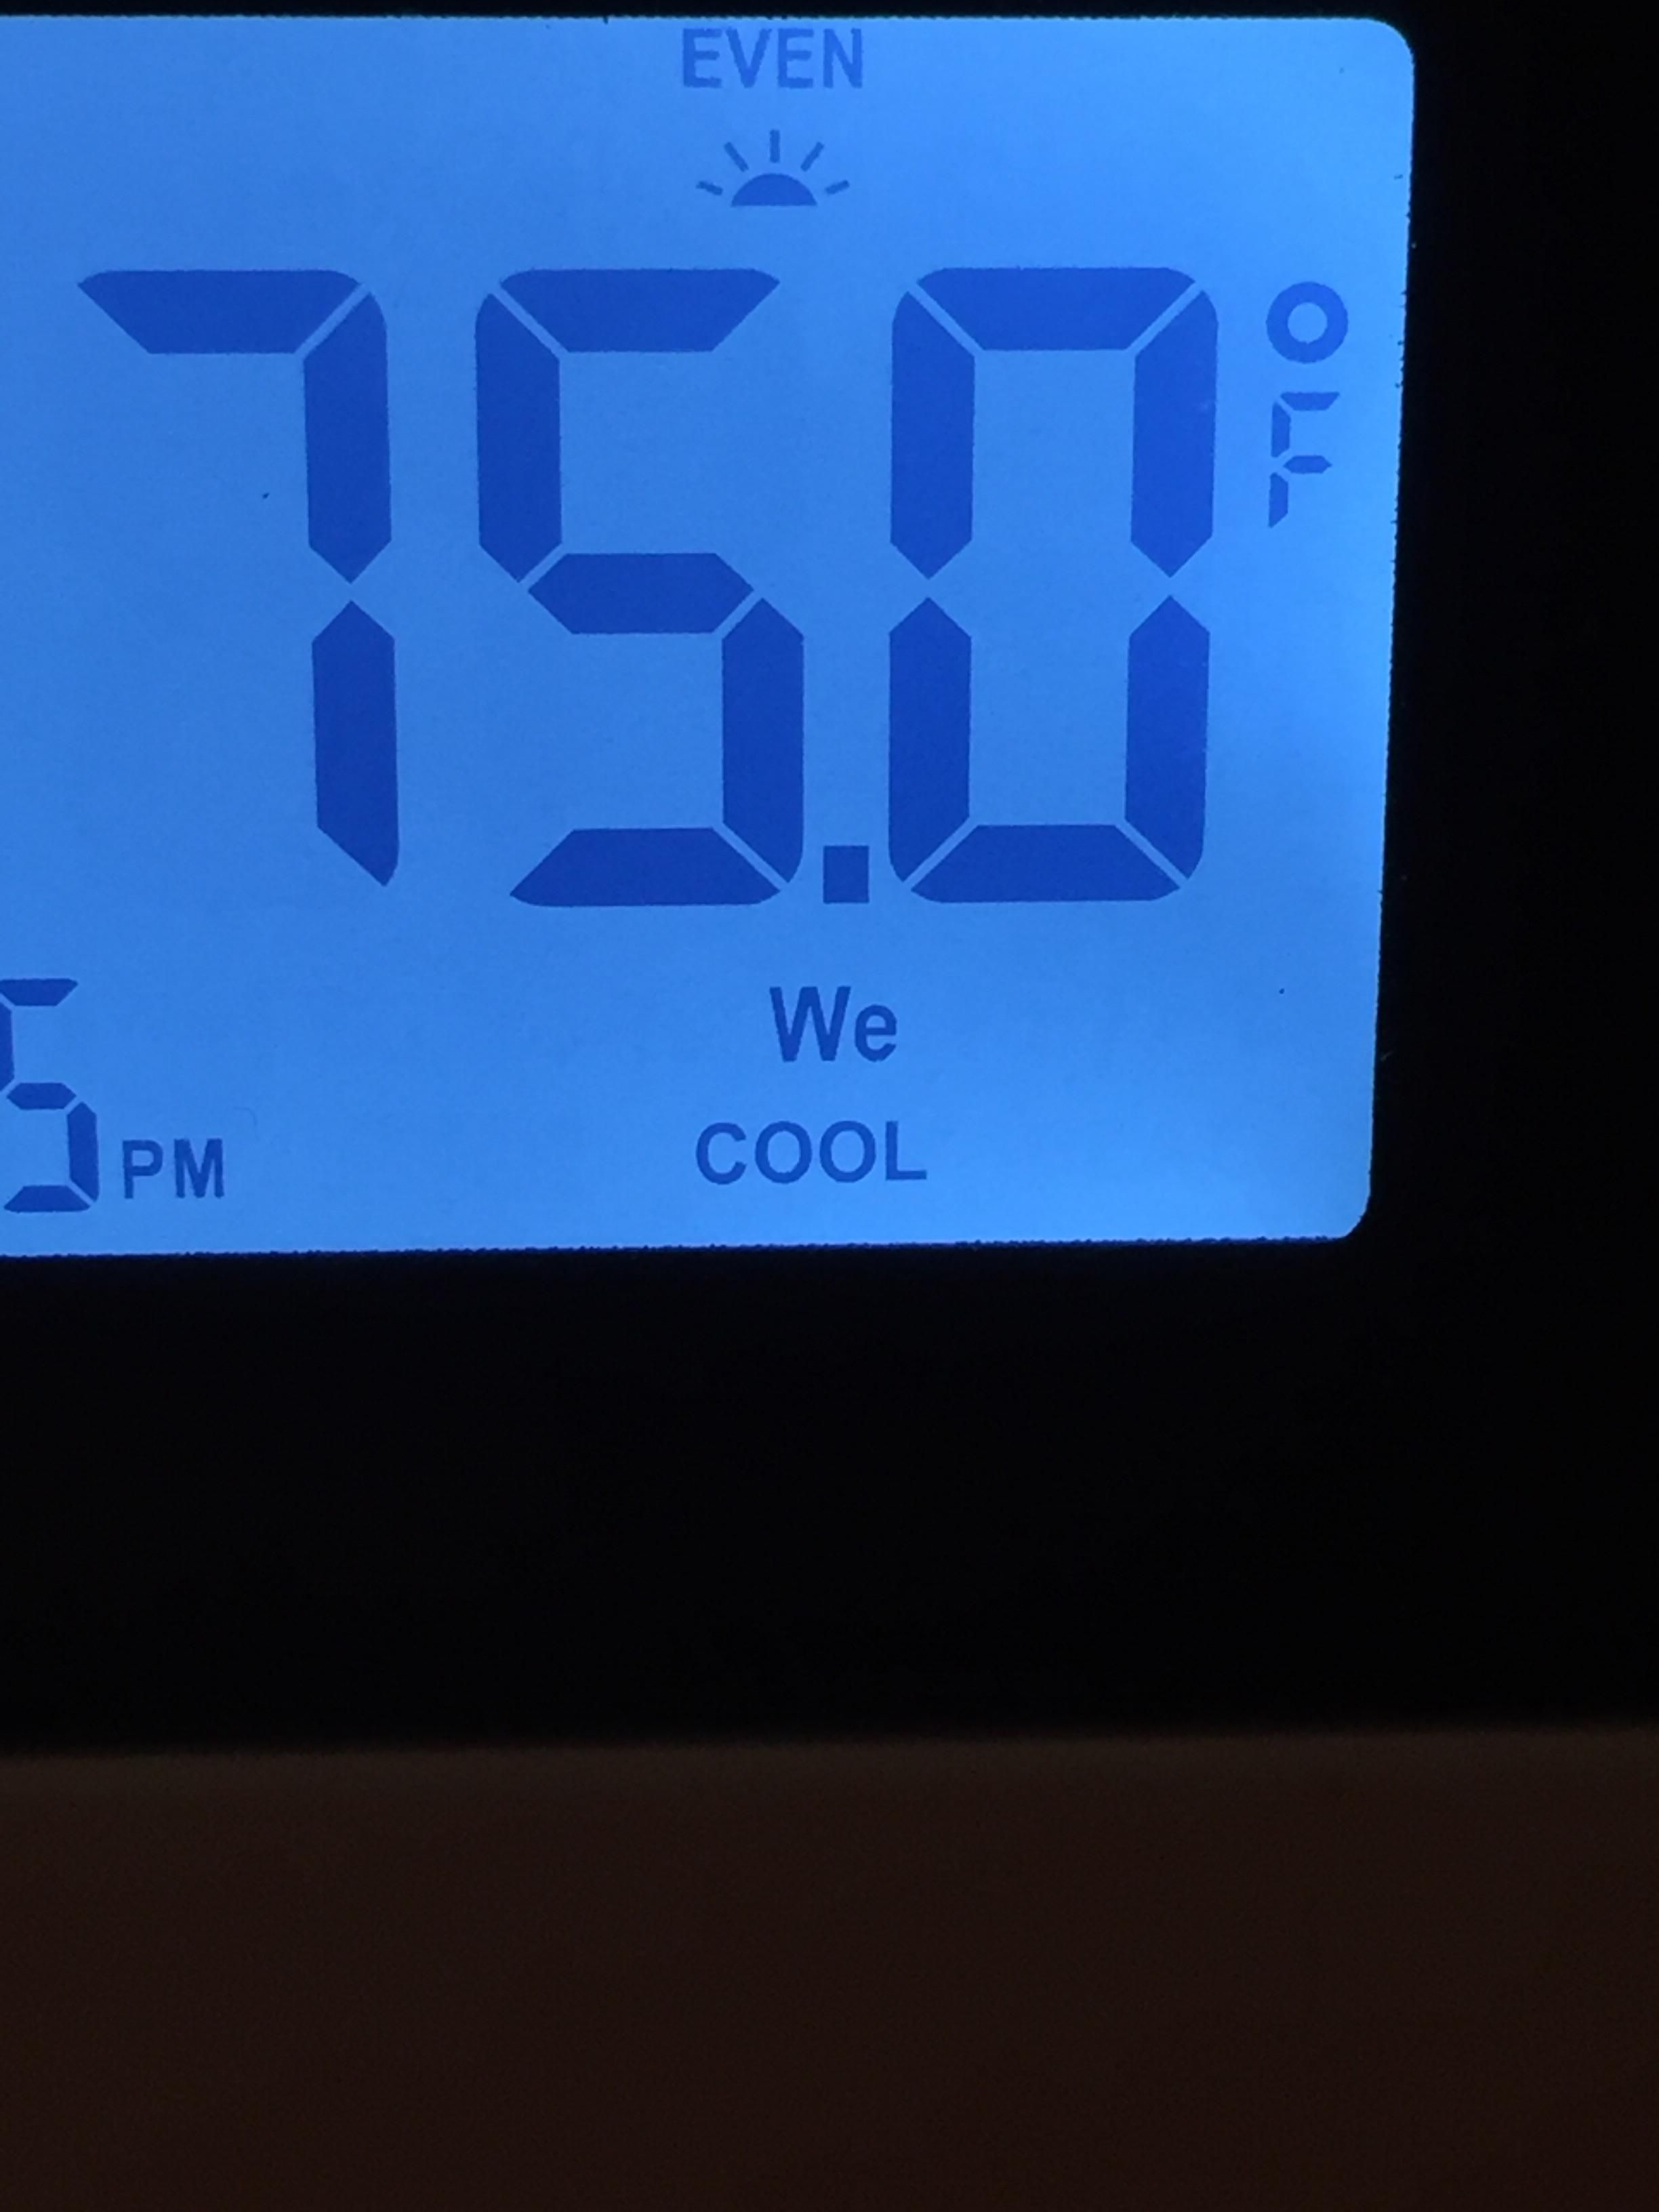 Hey thermostat, we cool?